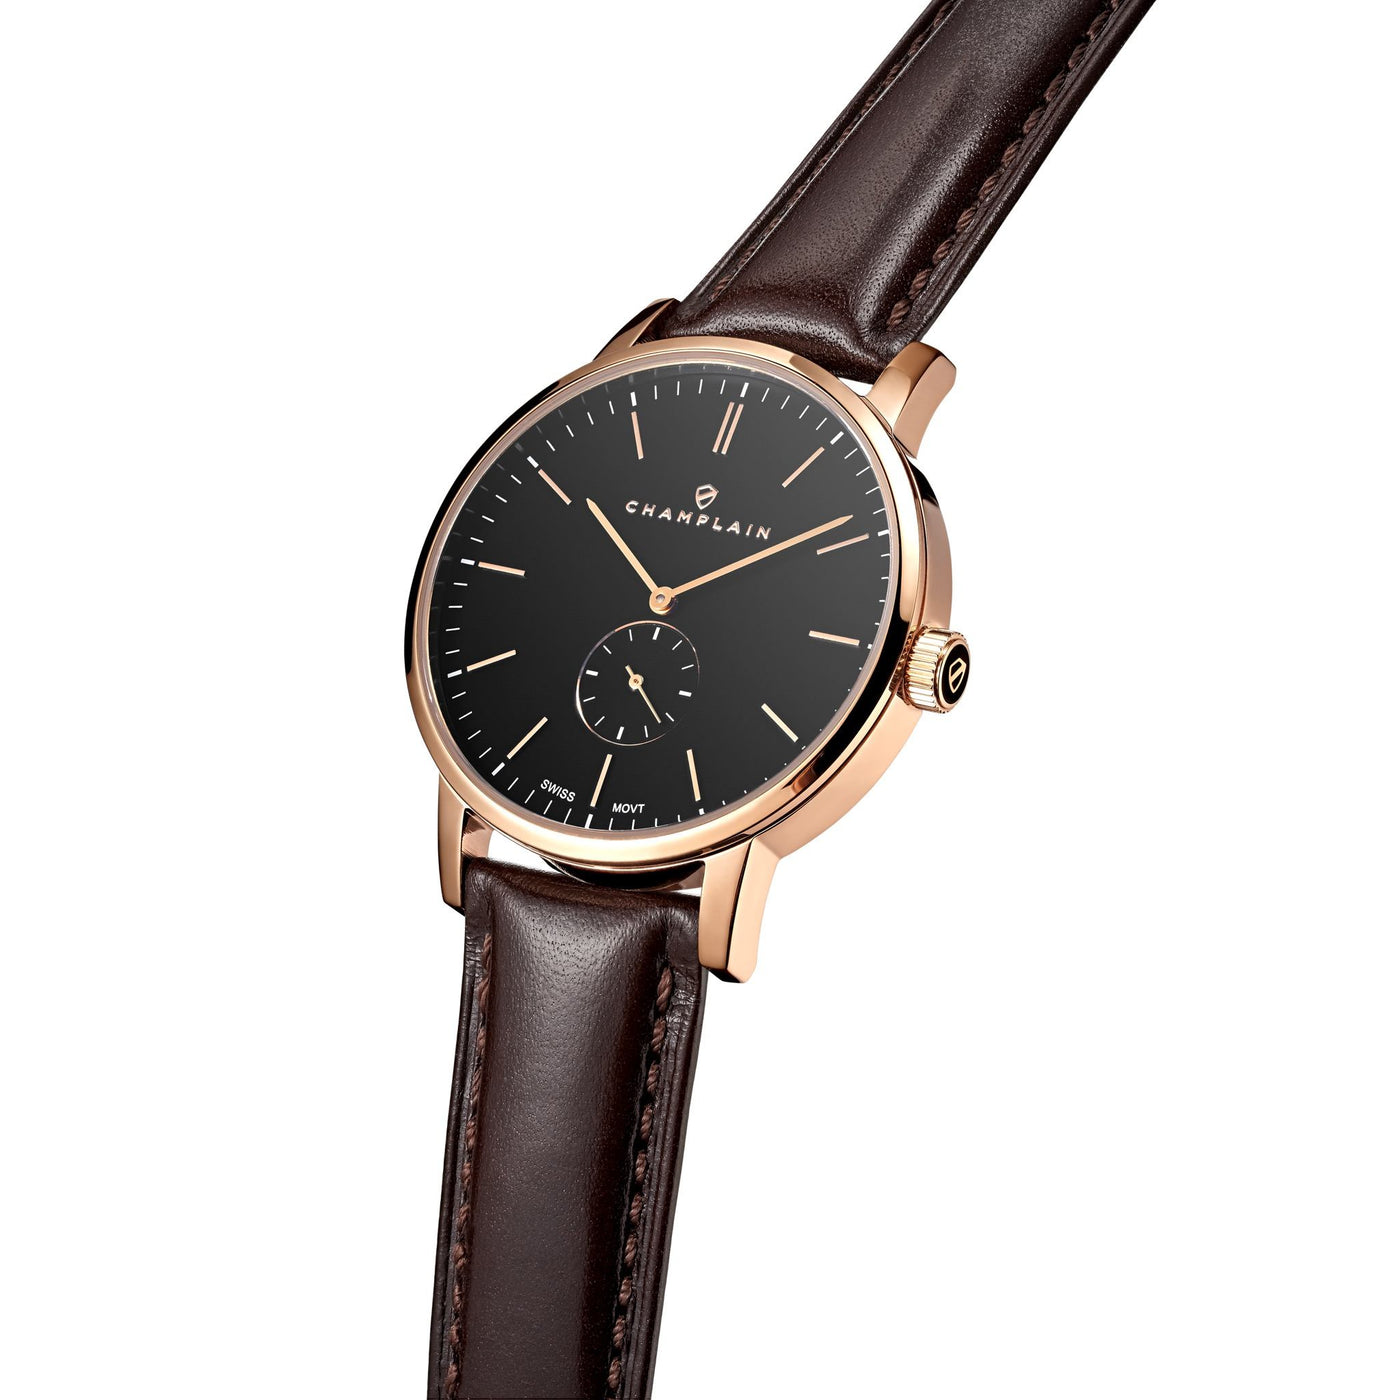 Rose Gold/Black - Brown Governor Watch by Champlain